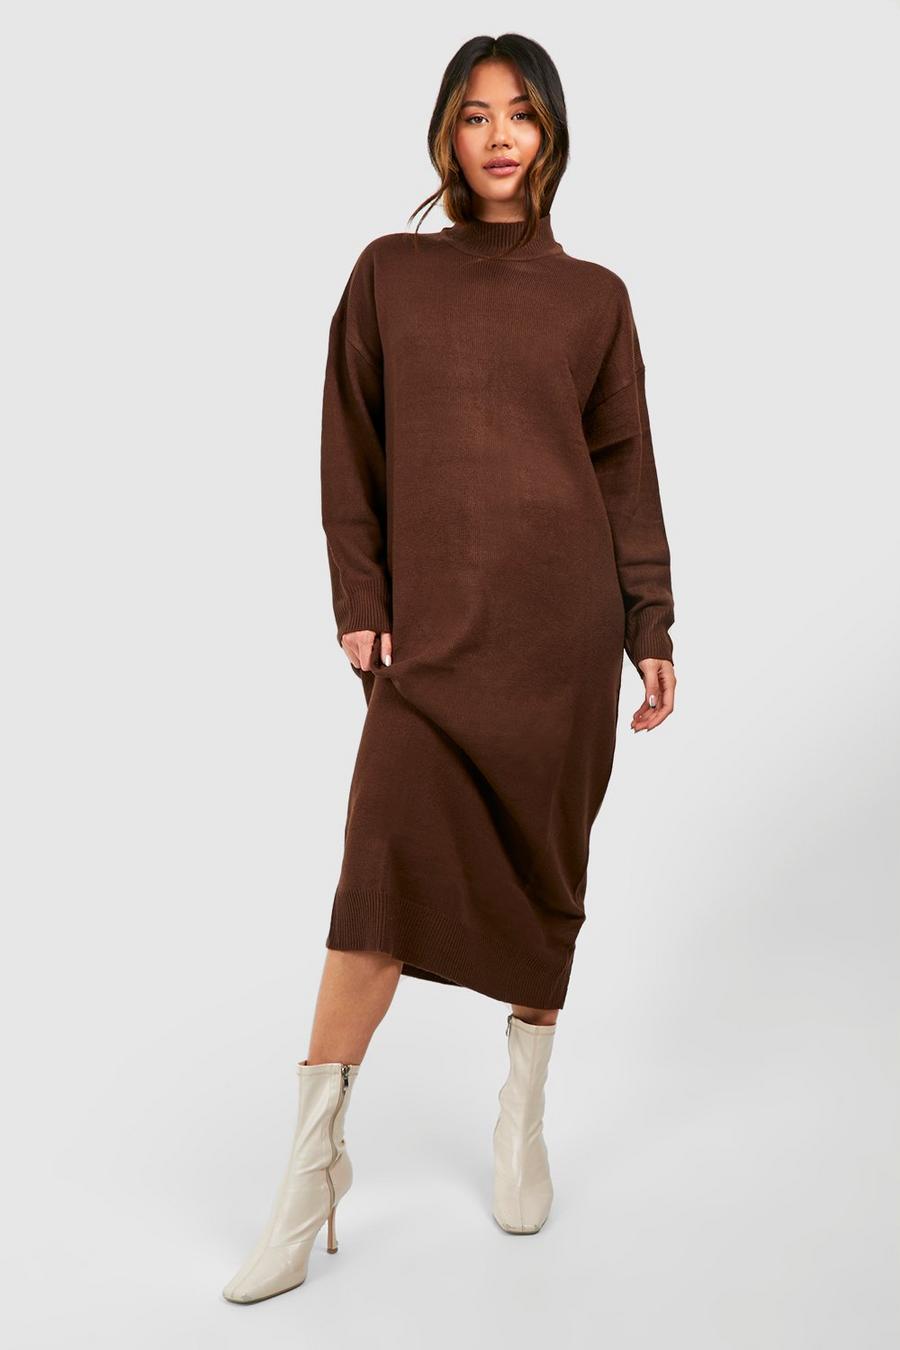 Chocolate marron High Neck Knitted Midaxi Dress